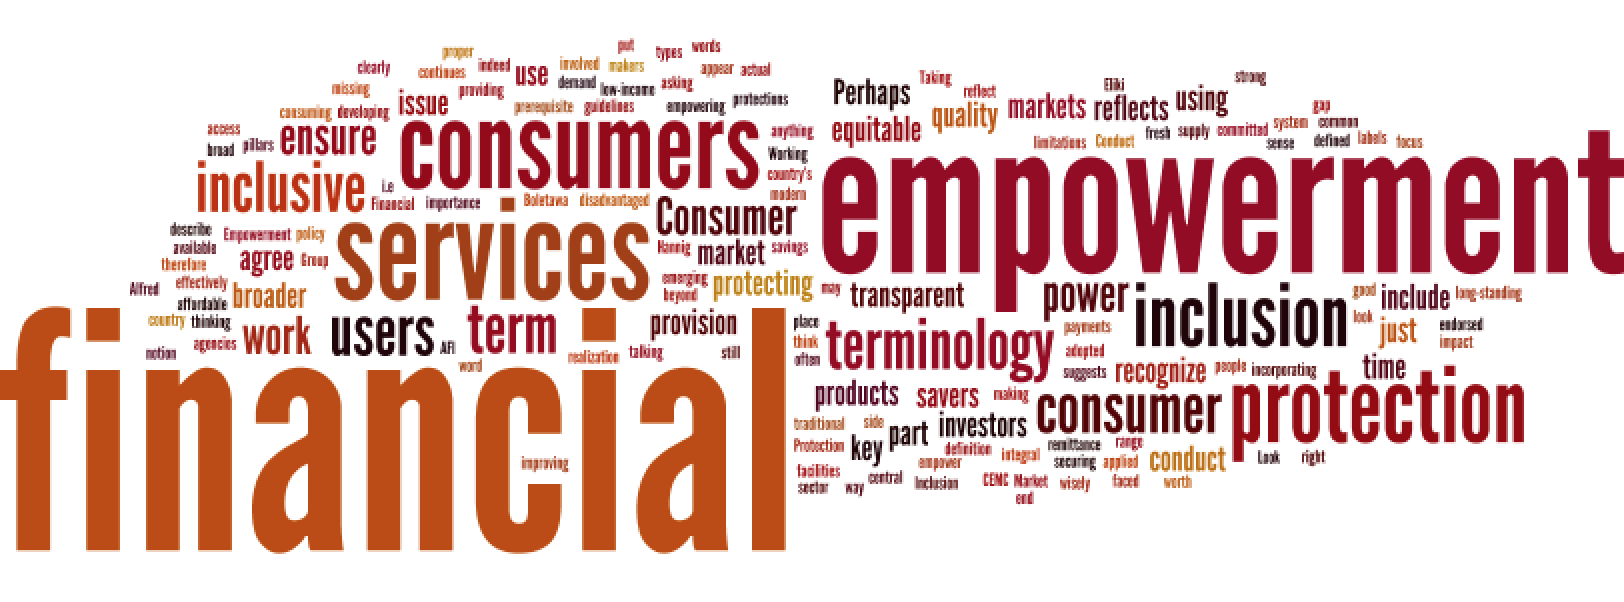 The Link between Consumer Protection and Financial Inclusion